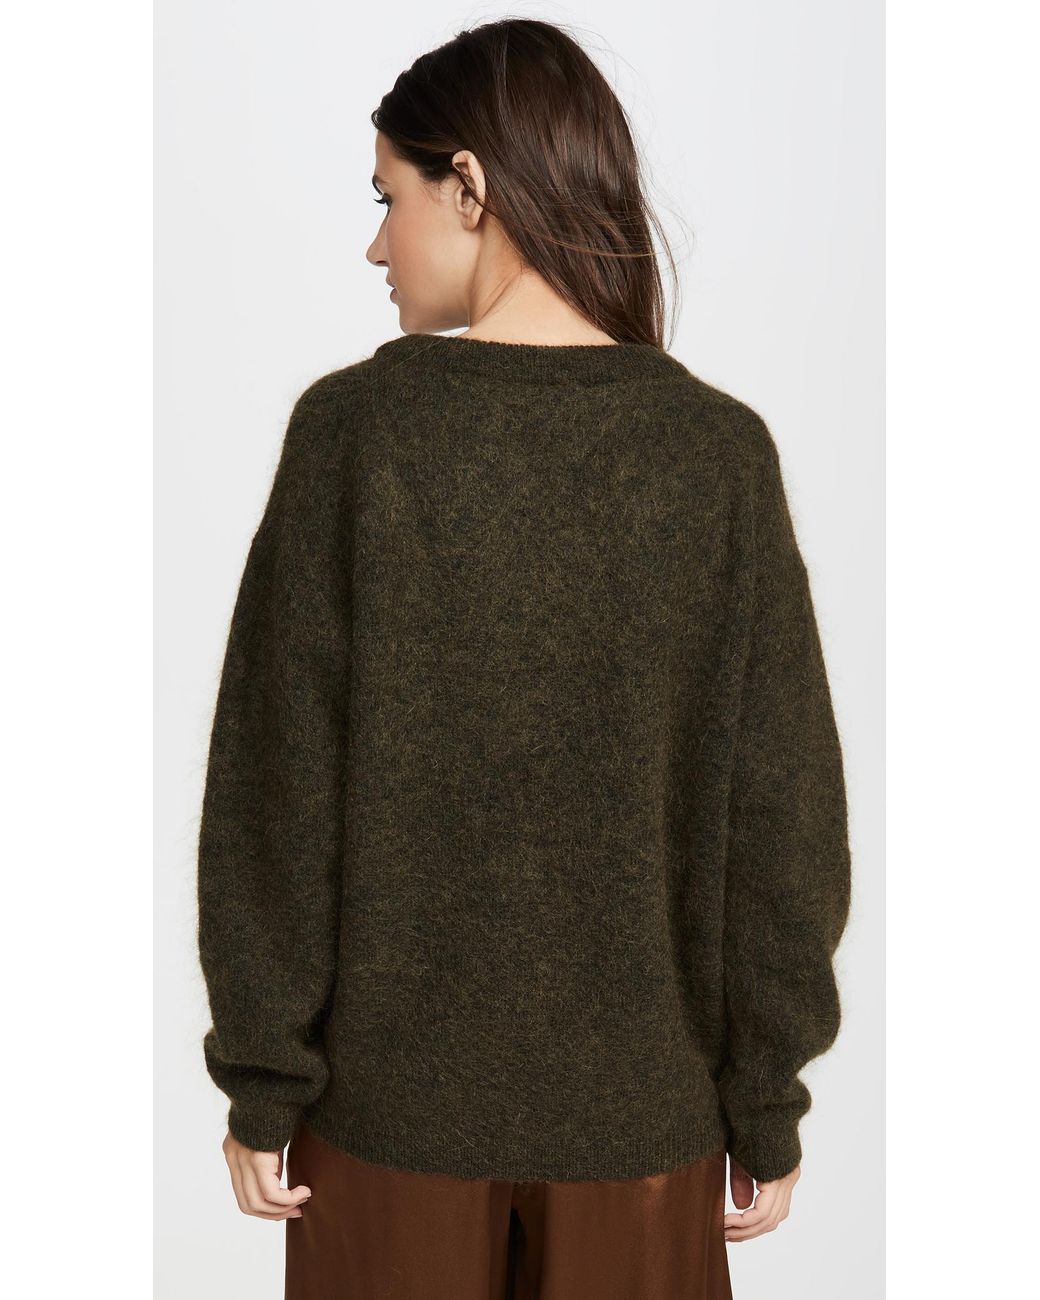 Acne Studios Synthetic Dramatic Mohair Sweater in Olive Green (Green) | Lyst